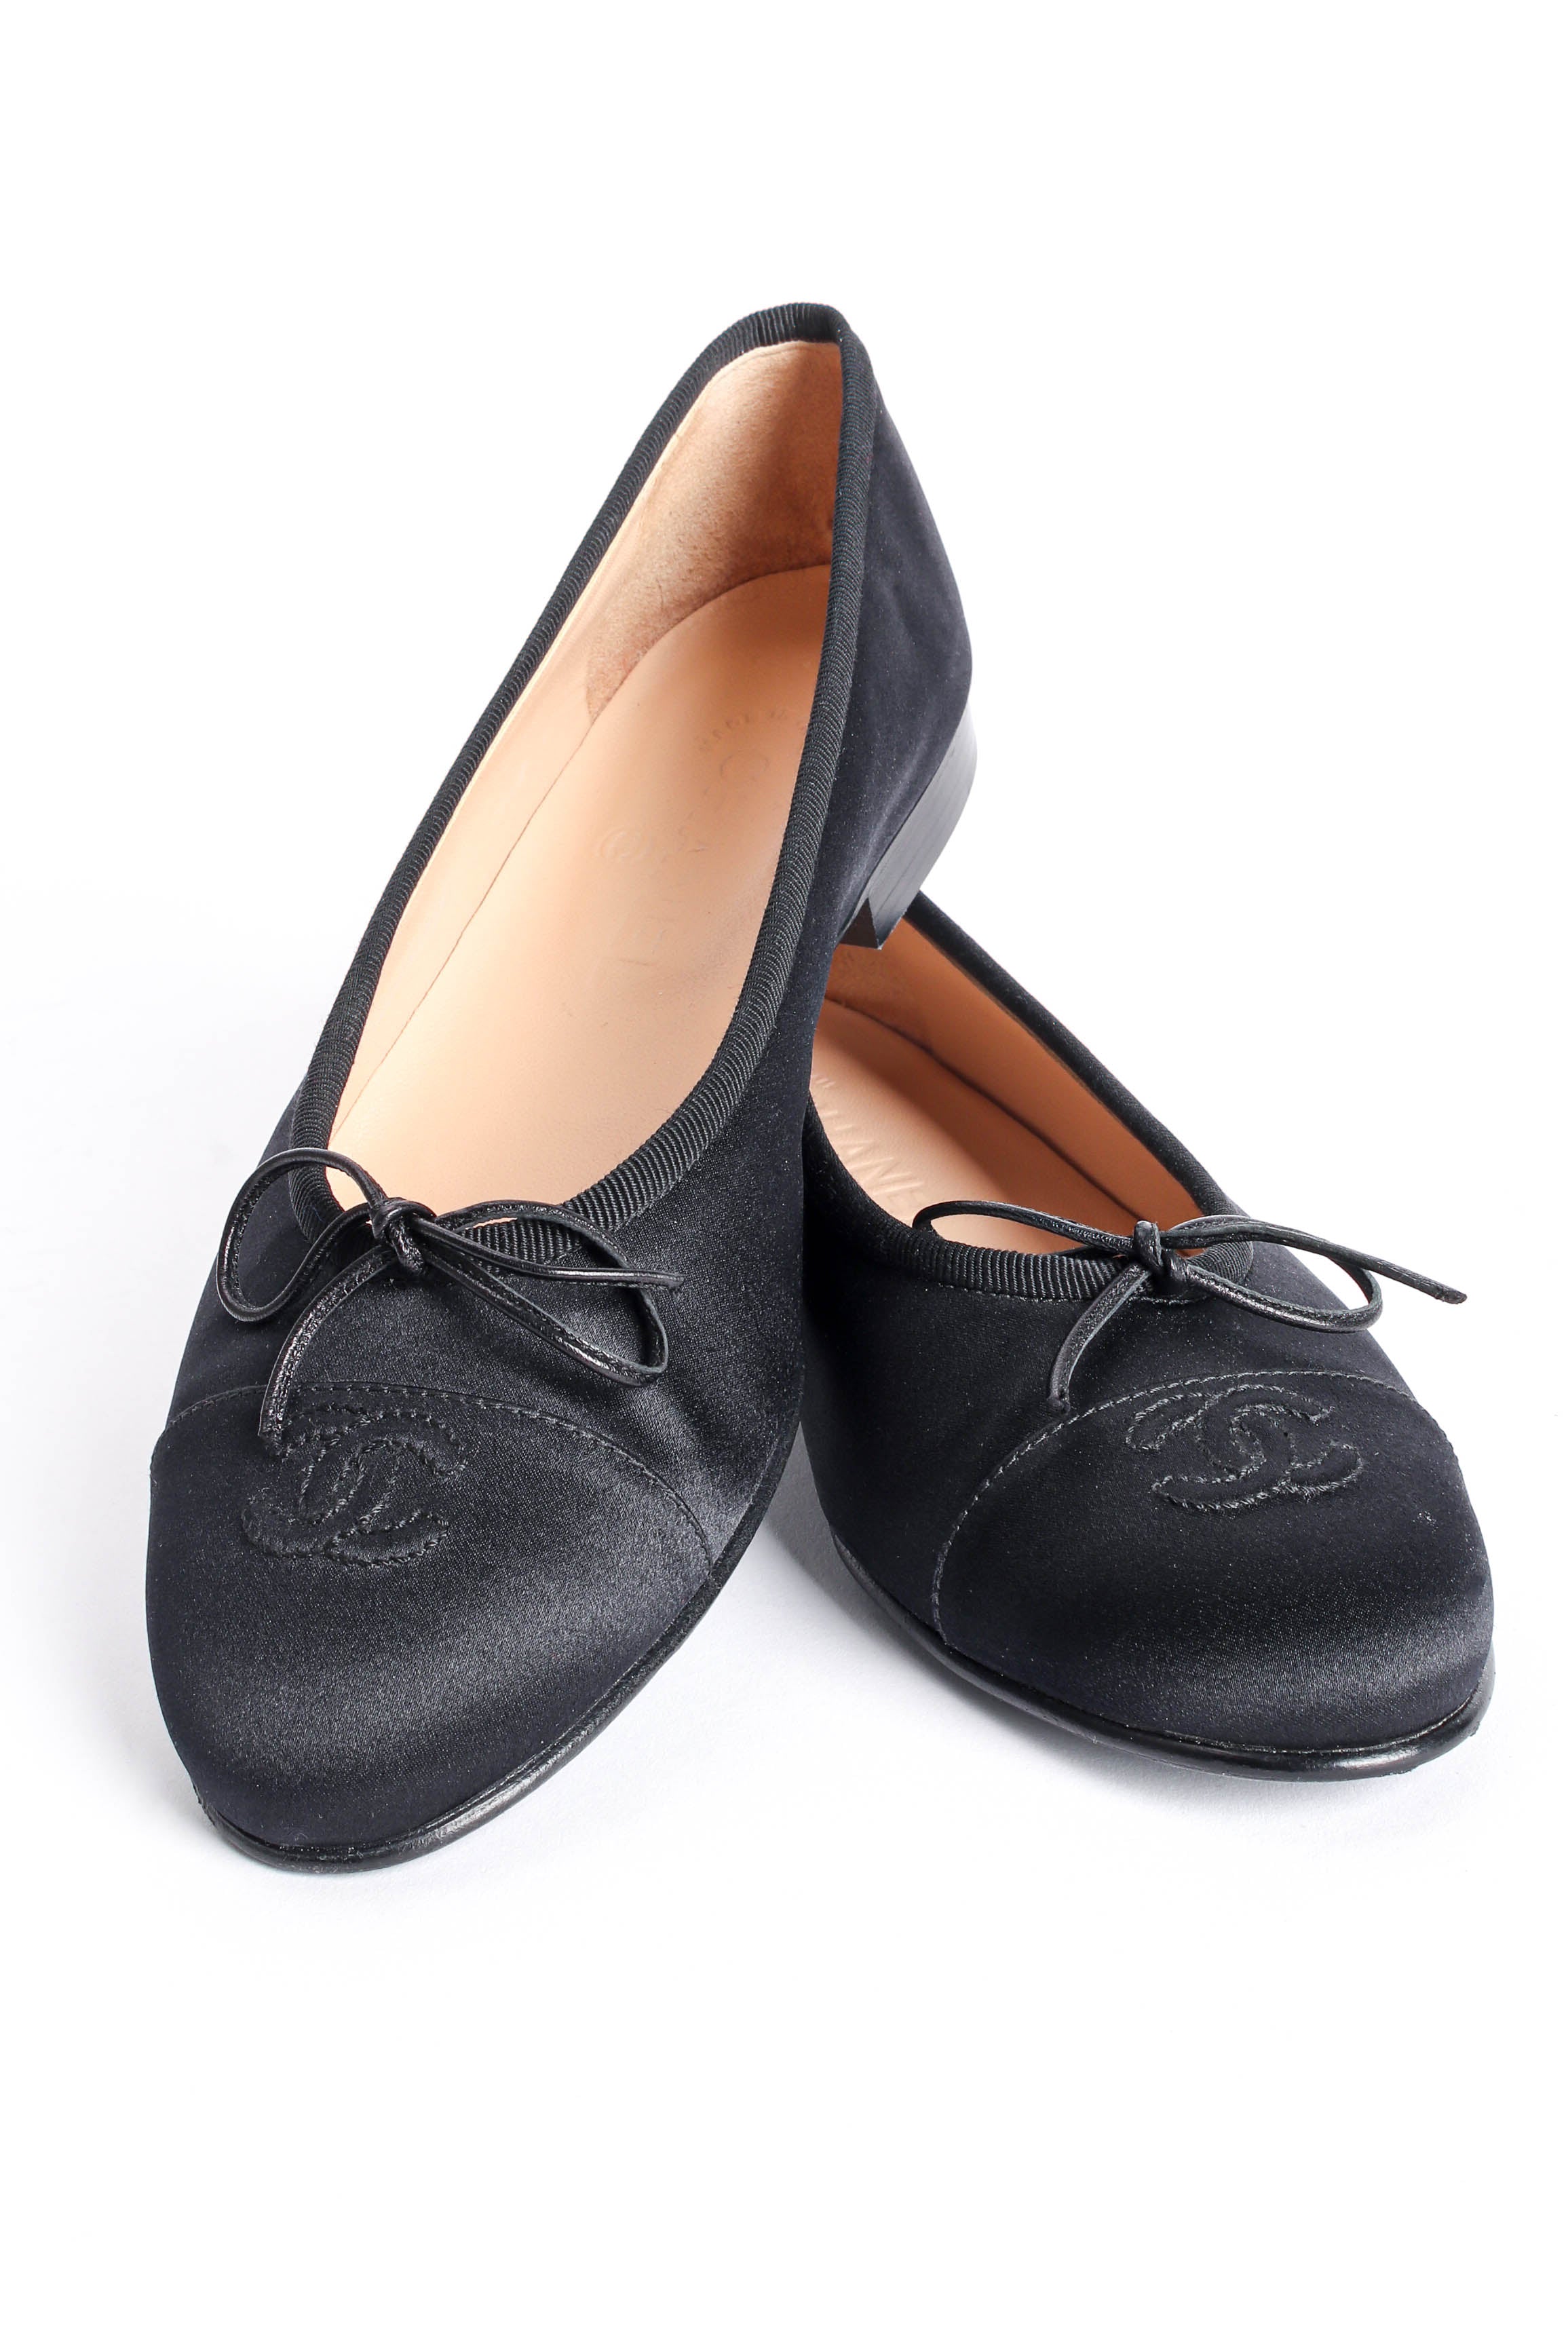 Chanel Classic Flat - 115 For Sale on 1stDibs